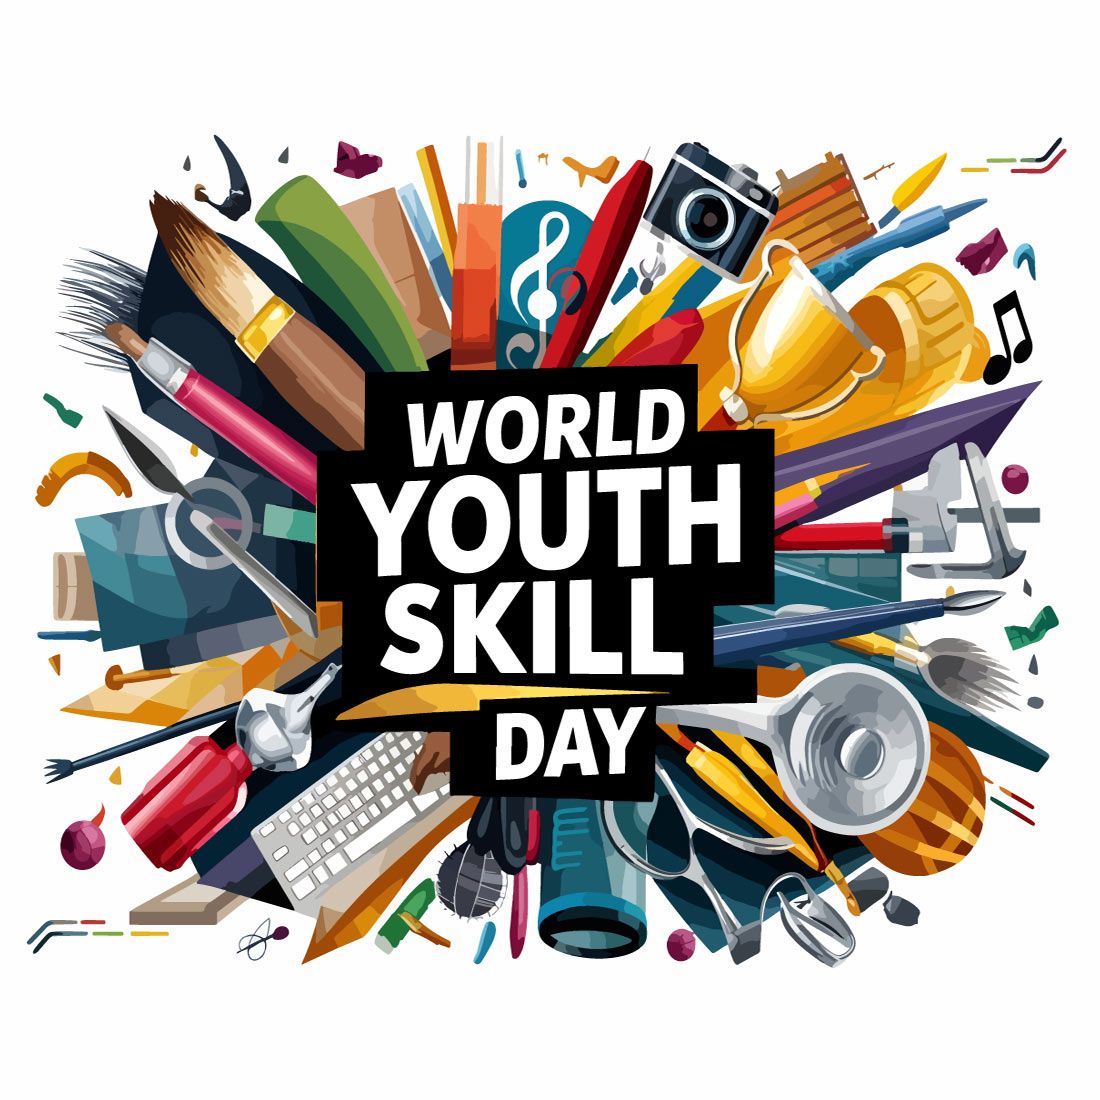 World Youth skill day preview image.